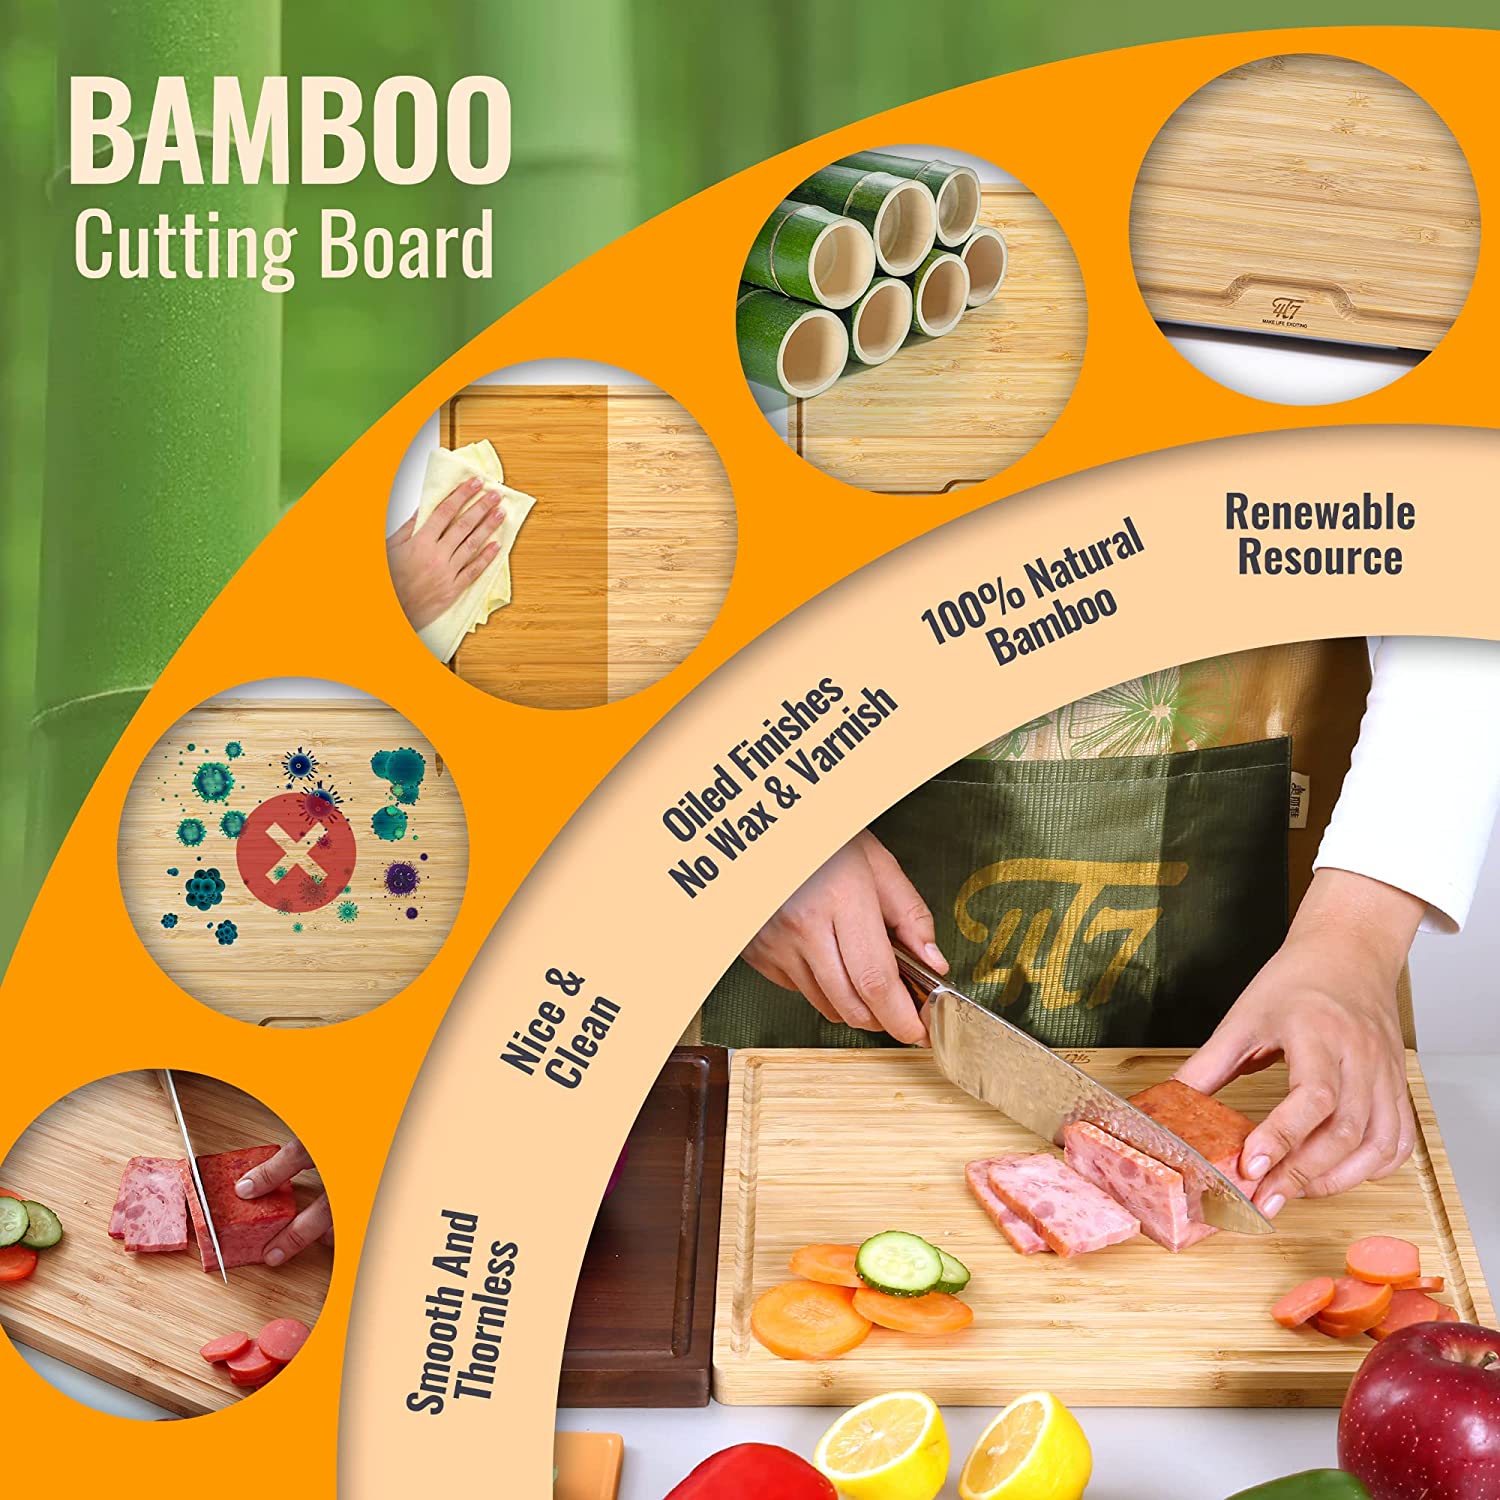 Caraway Unveils Prep Set + Cutting Boards for Easy Meal Prep